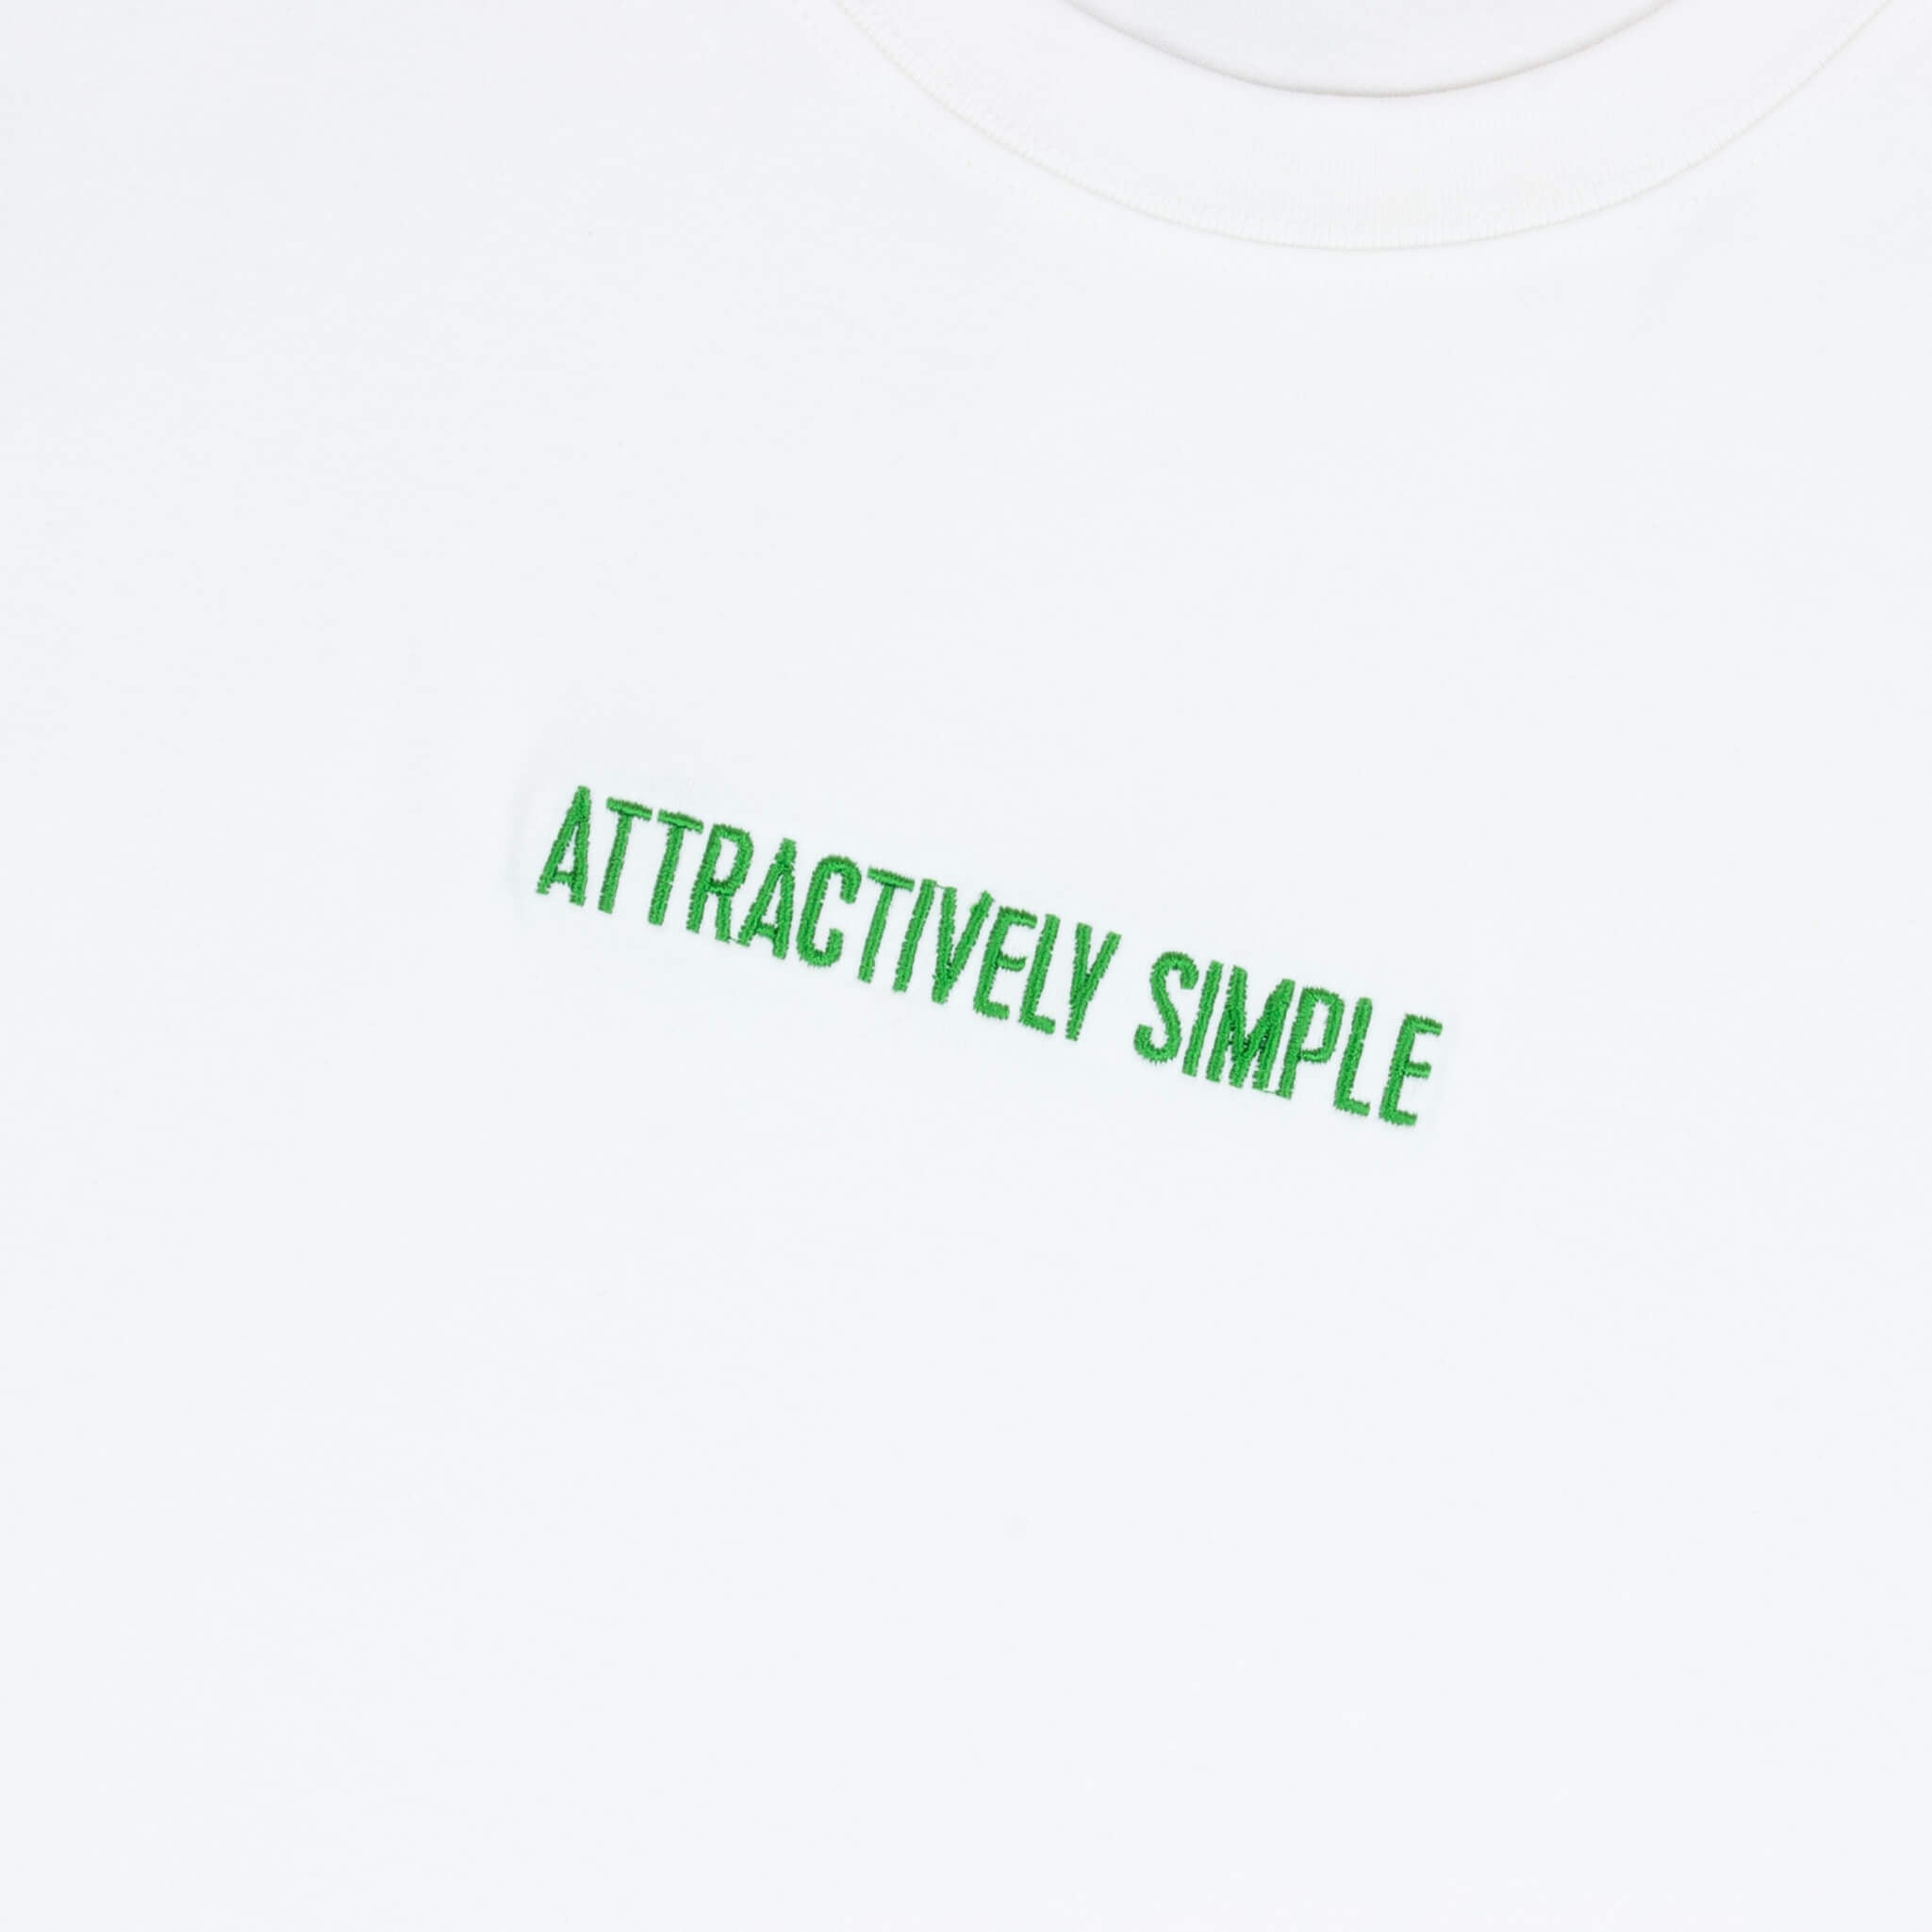 Attractively Simple T-Shirt, White / Forest